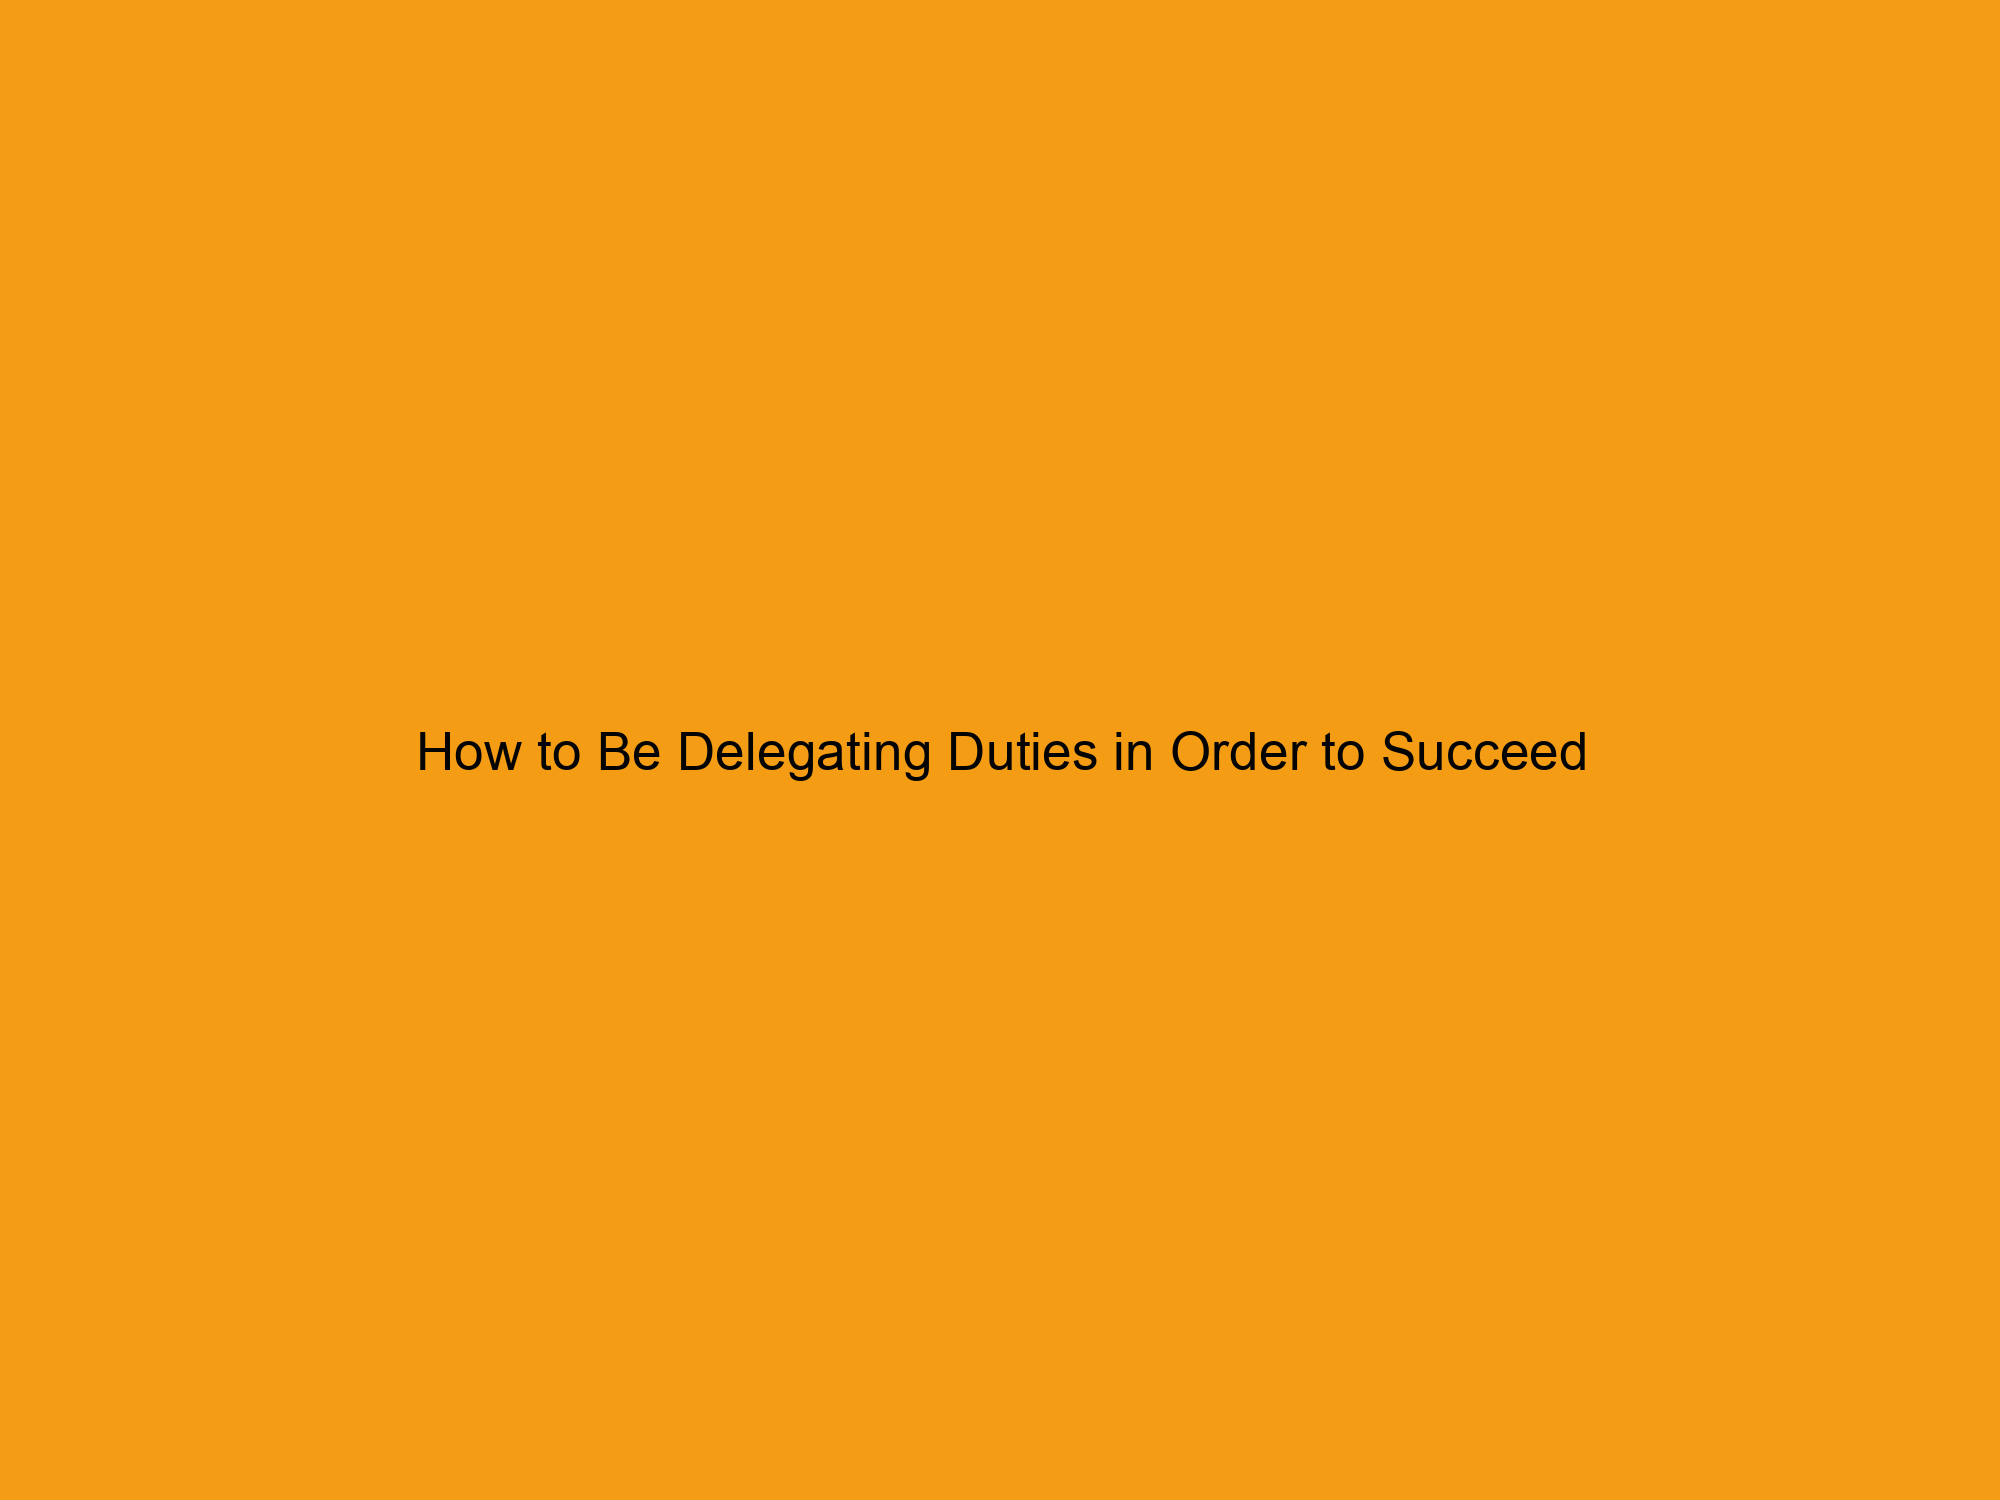 How to Be Delegating Duties in Order to Succeed